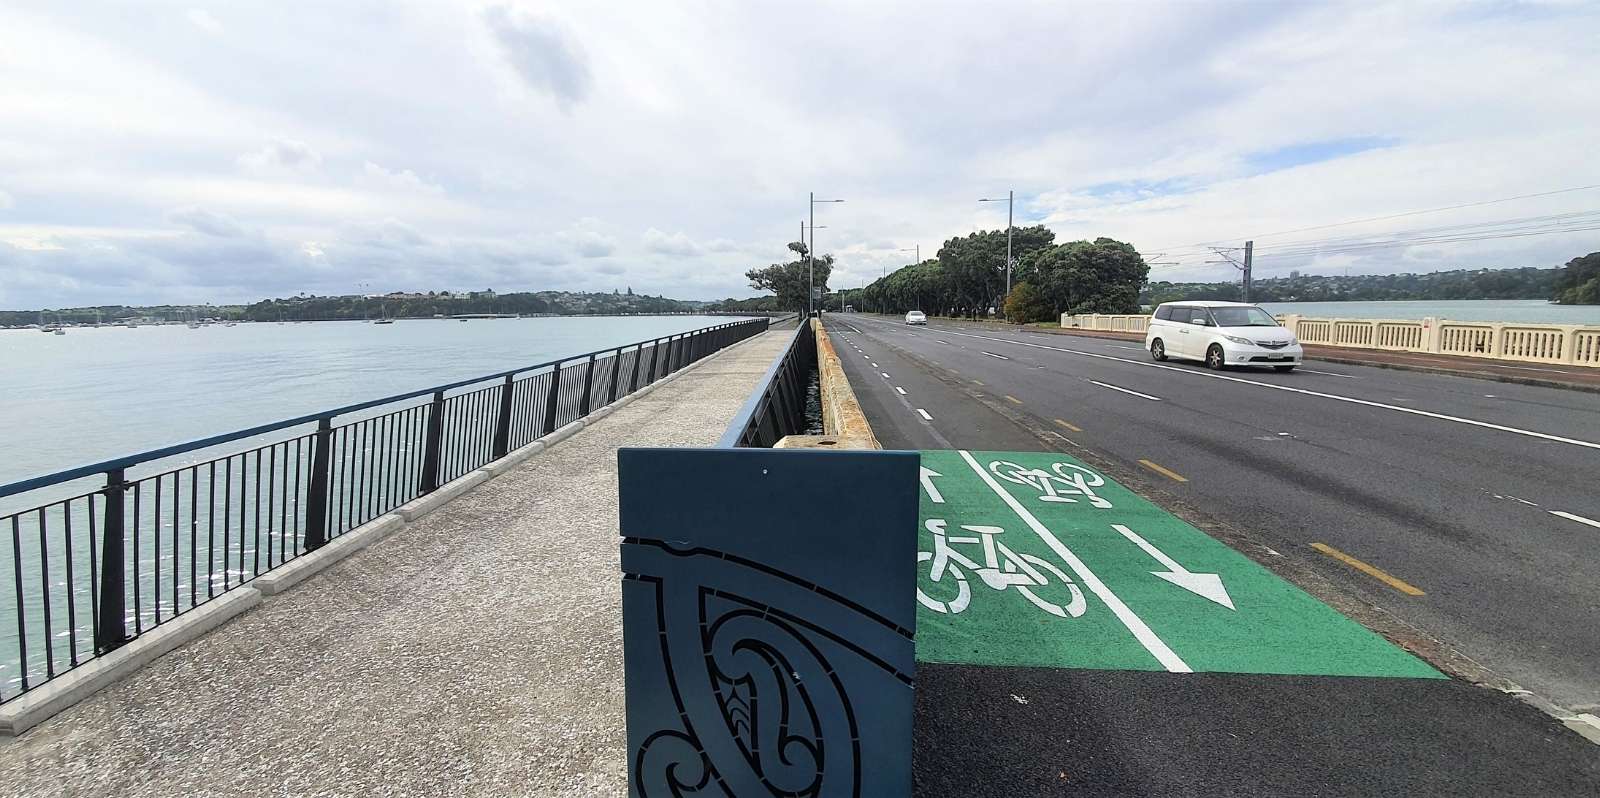 New extension to the bridge for the two way bike lane on the Auckland waterfront in 2021 (1)